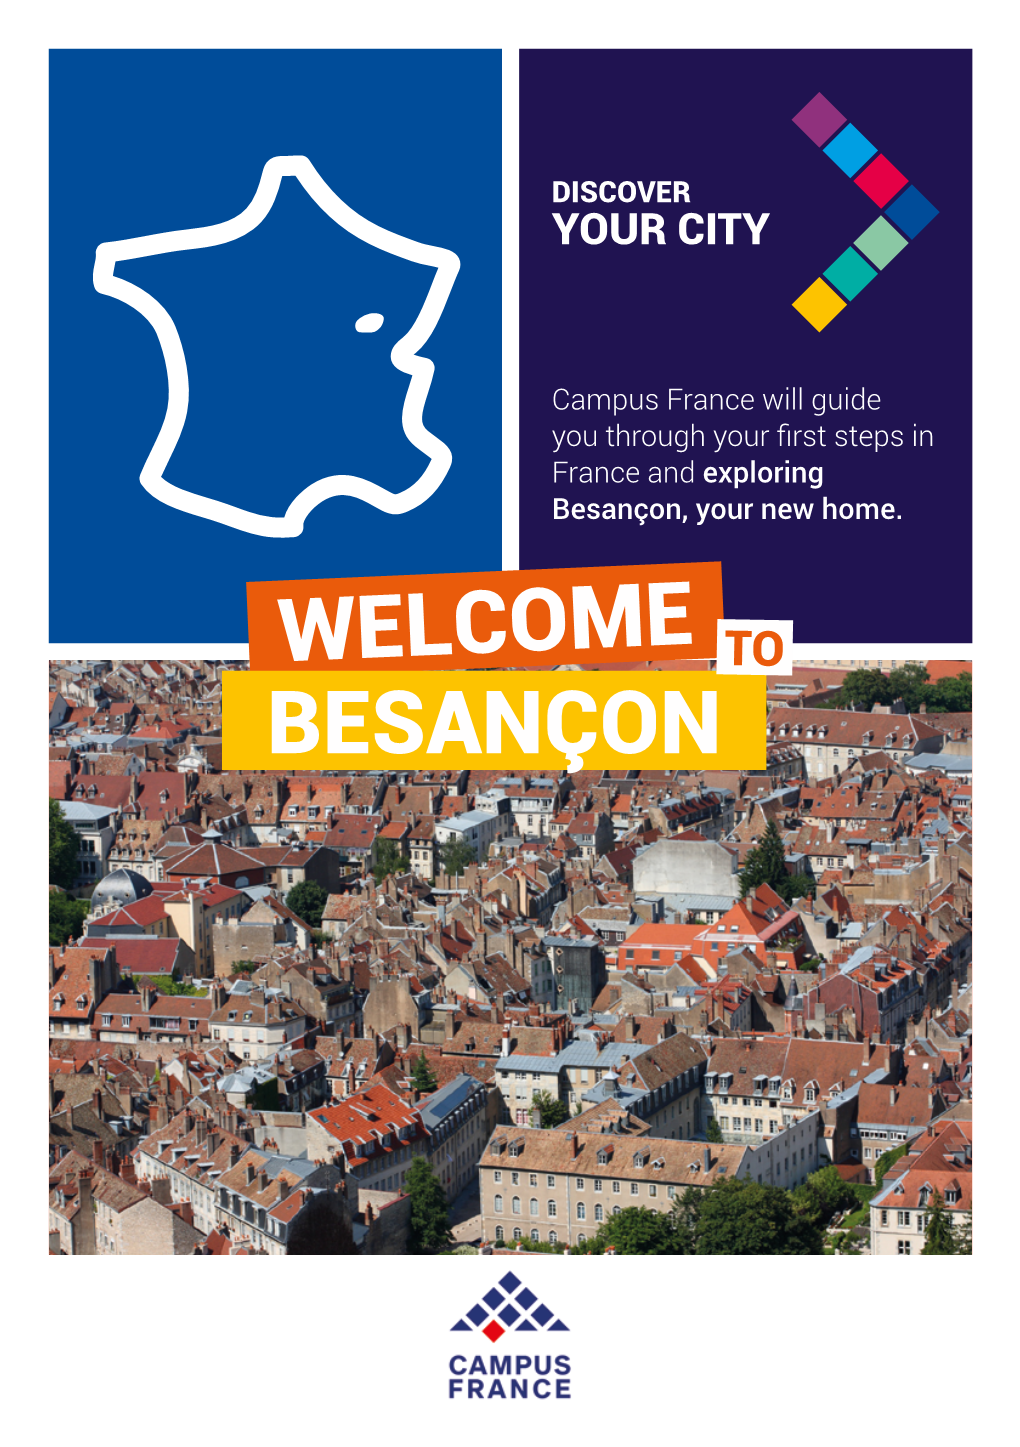 Besançon, Your New Home